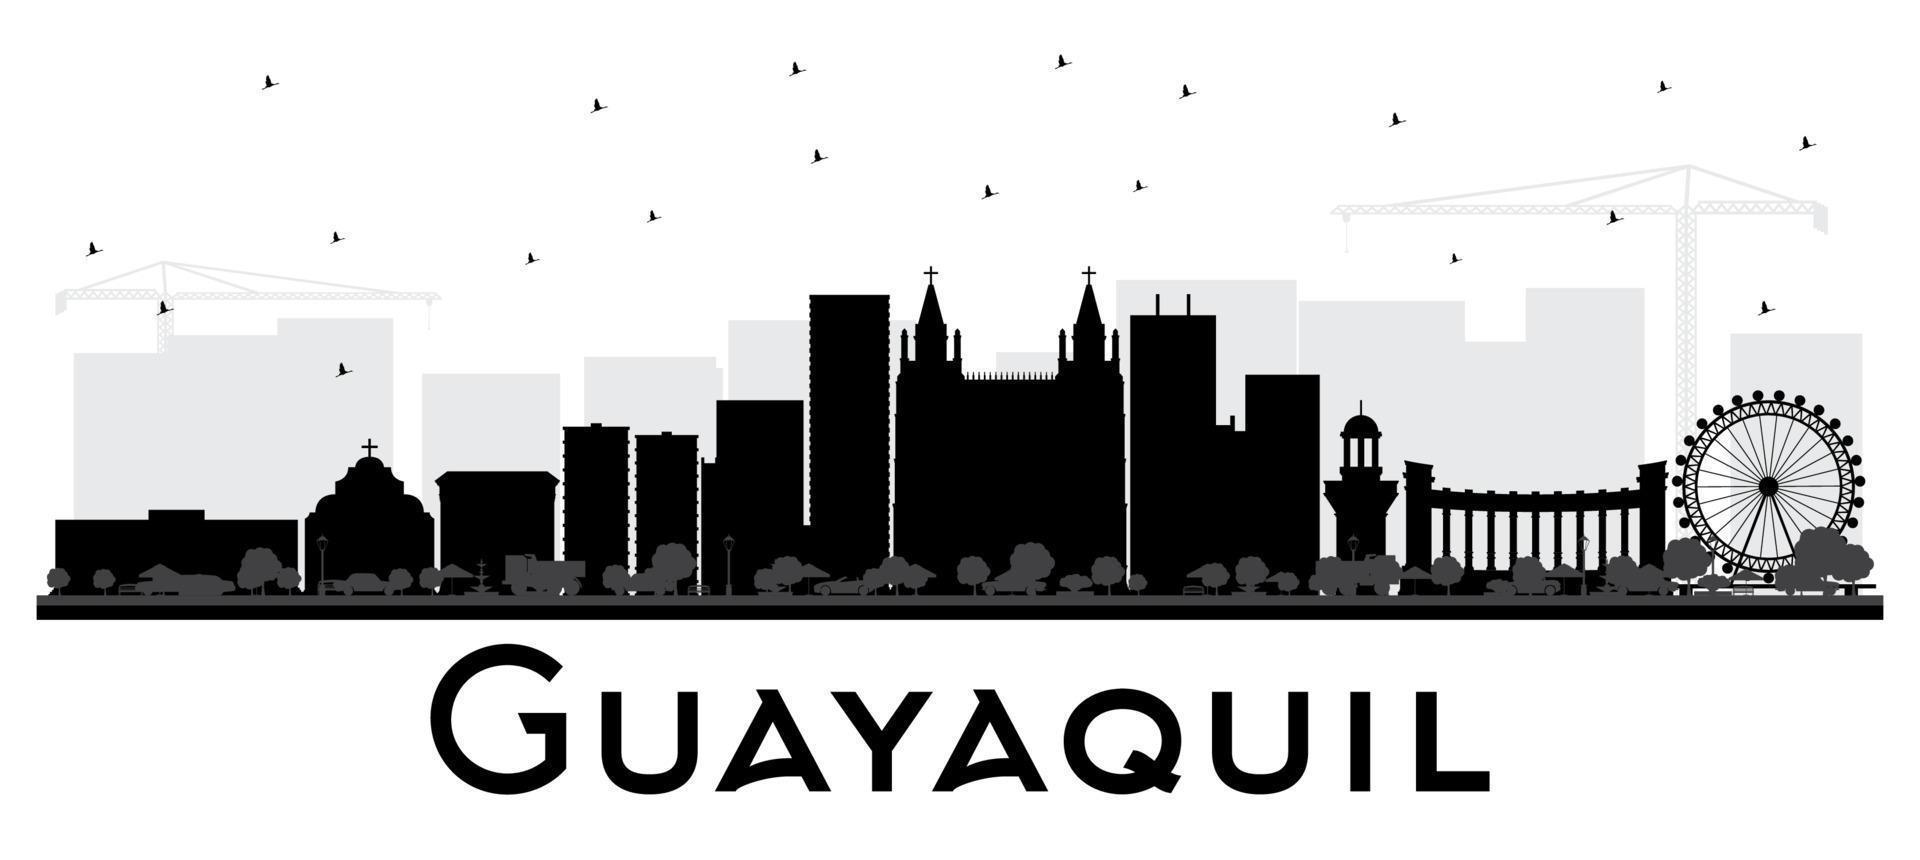 Guayaquil Ecuador City Skyline with Black Buildings Isolated on White. vector